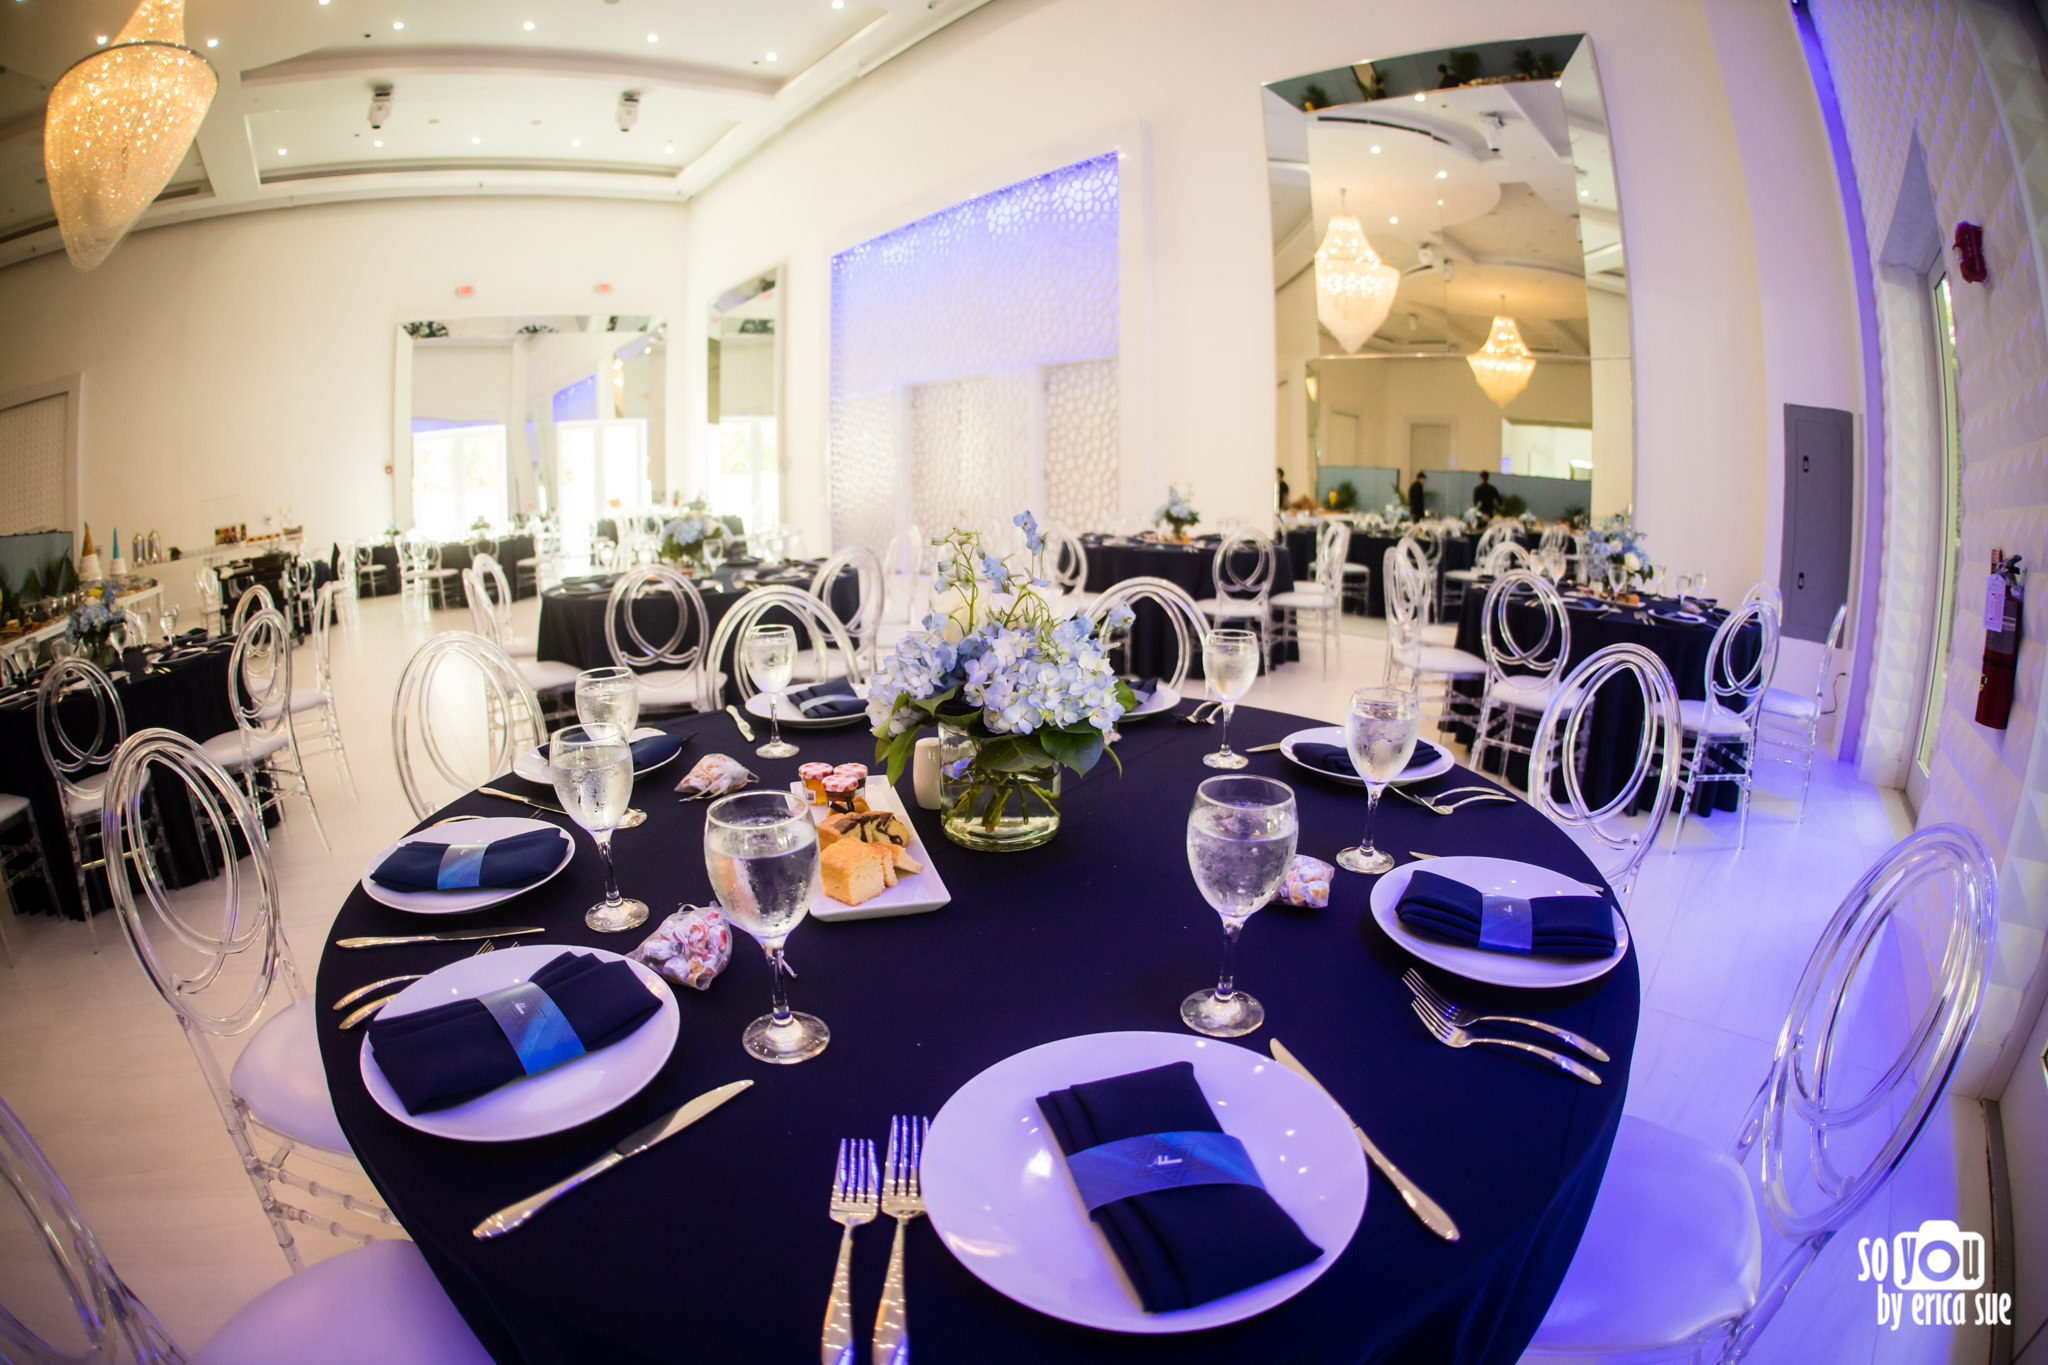 so-you-by-erica-sue-mitzvah-bnai-sephardim-hollywood-one-event-place-kosher-caterer-0557.jpg